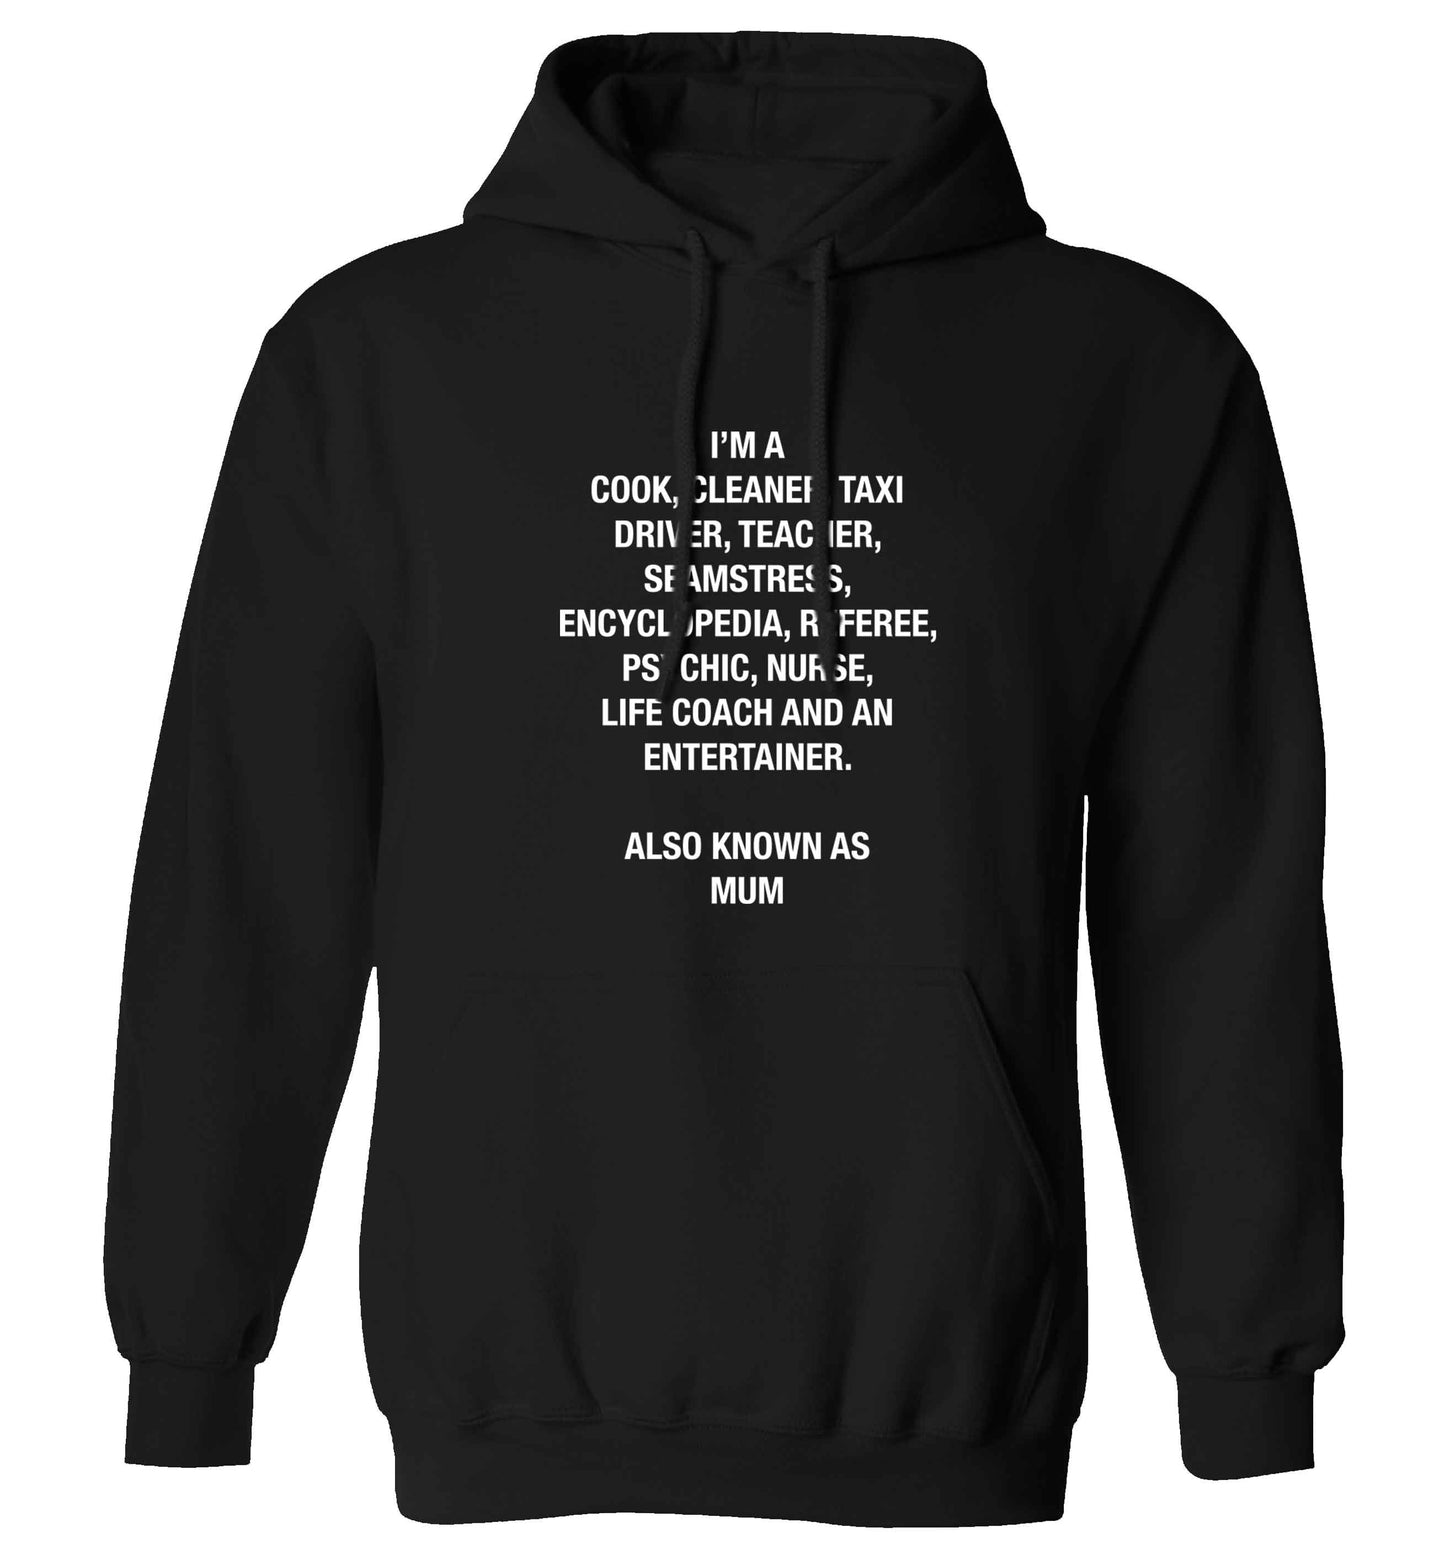 Funny gifts for your mum on mother's dayor her birthday! Mum, cook, cleaner, taxi driver, teacher, seamstress, encyclopedia, referee, psychic, nurse, life coach and entertainer adults unisex black hoodie 2XL